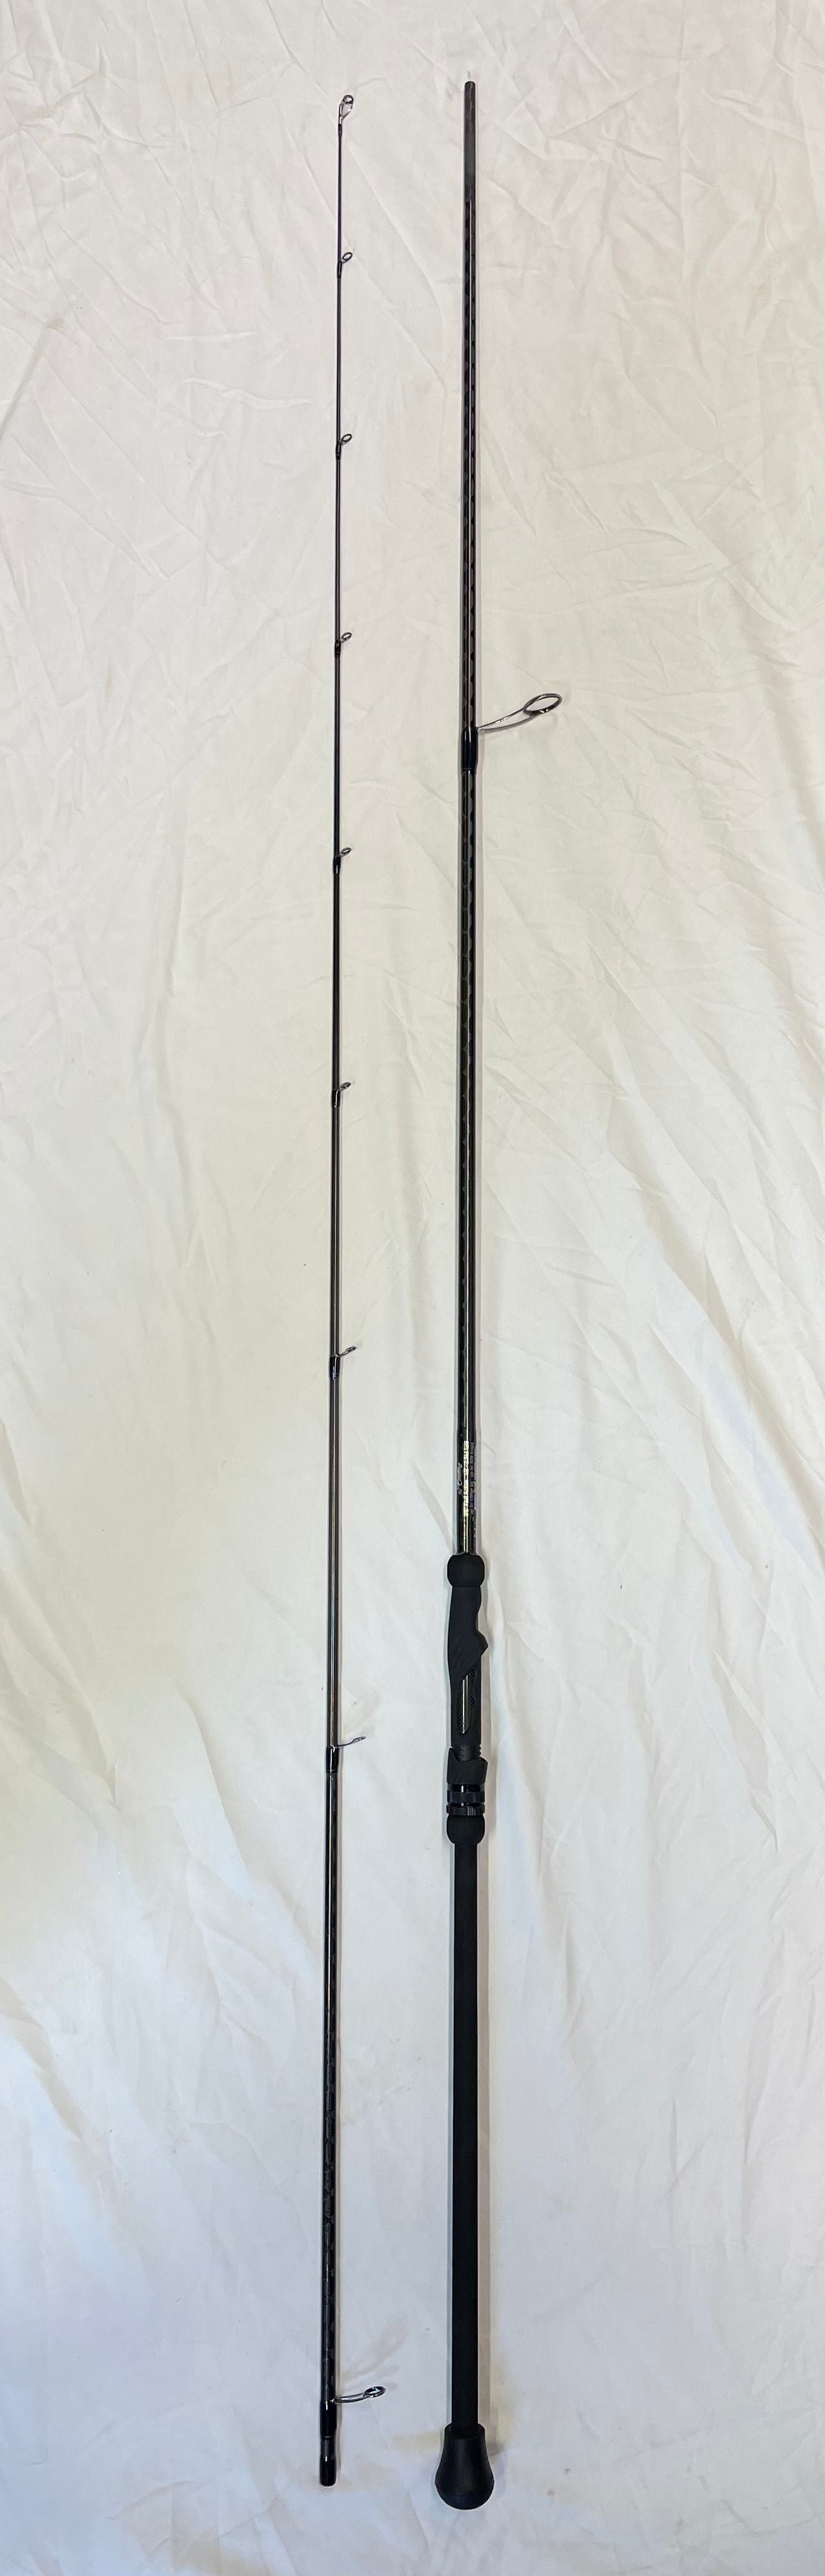 Rod Casting Fishing Rods & Poles with 6 Guides and 2 Pieces for sale